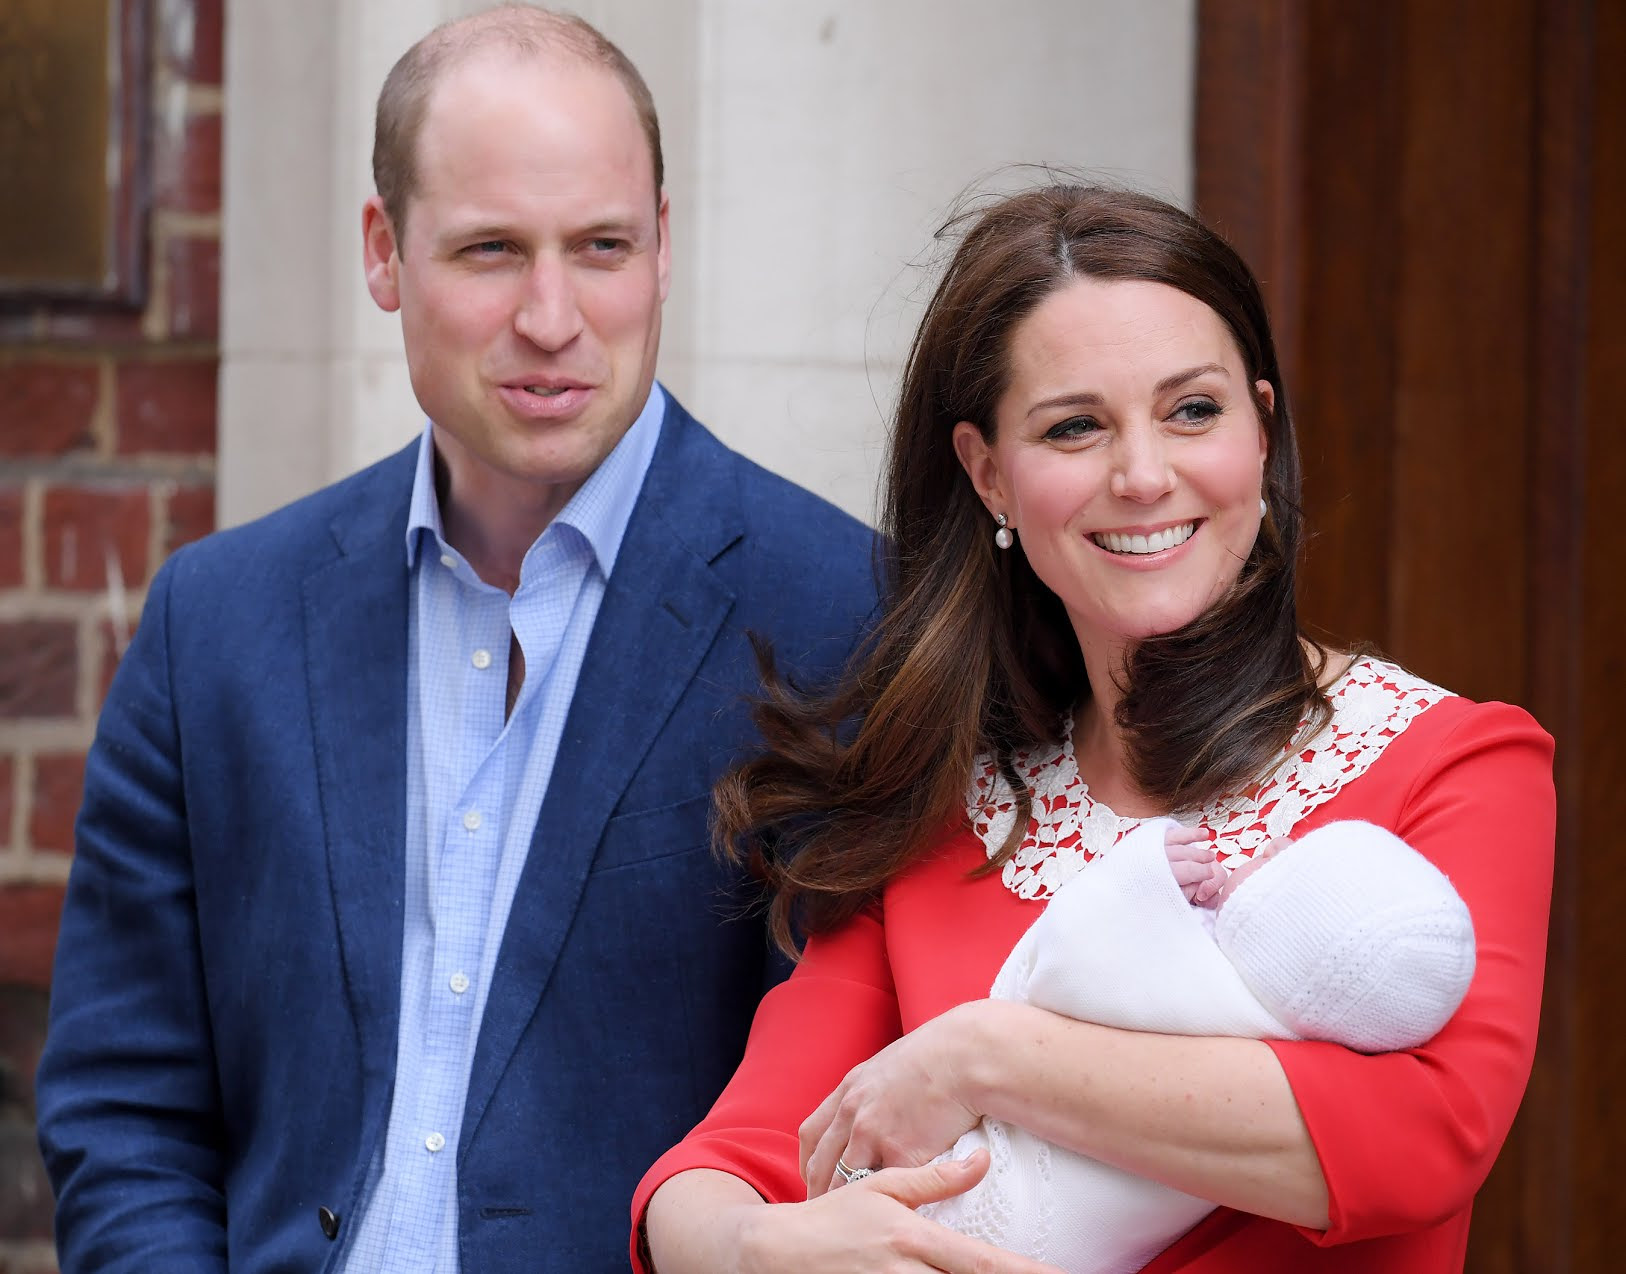 Kate Middleton Steps Out with New Royal Baby 7 Hours After Giving Birth